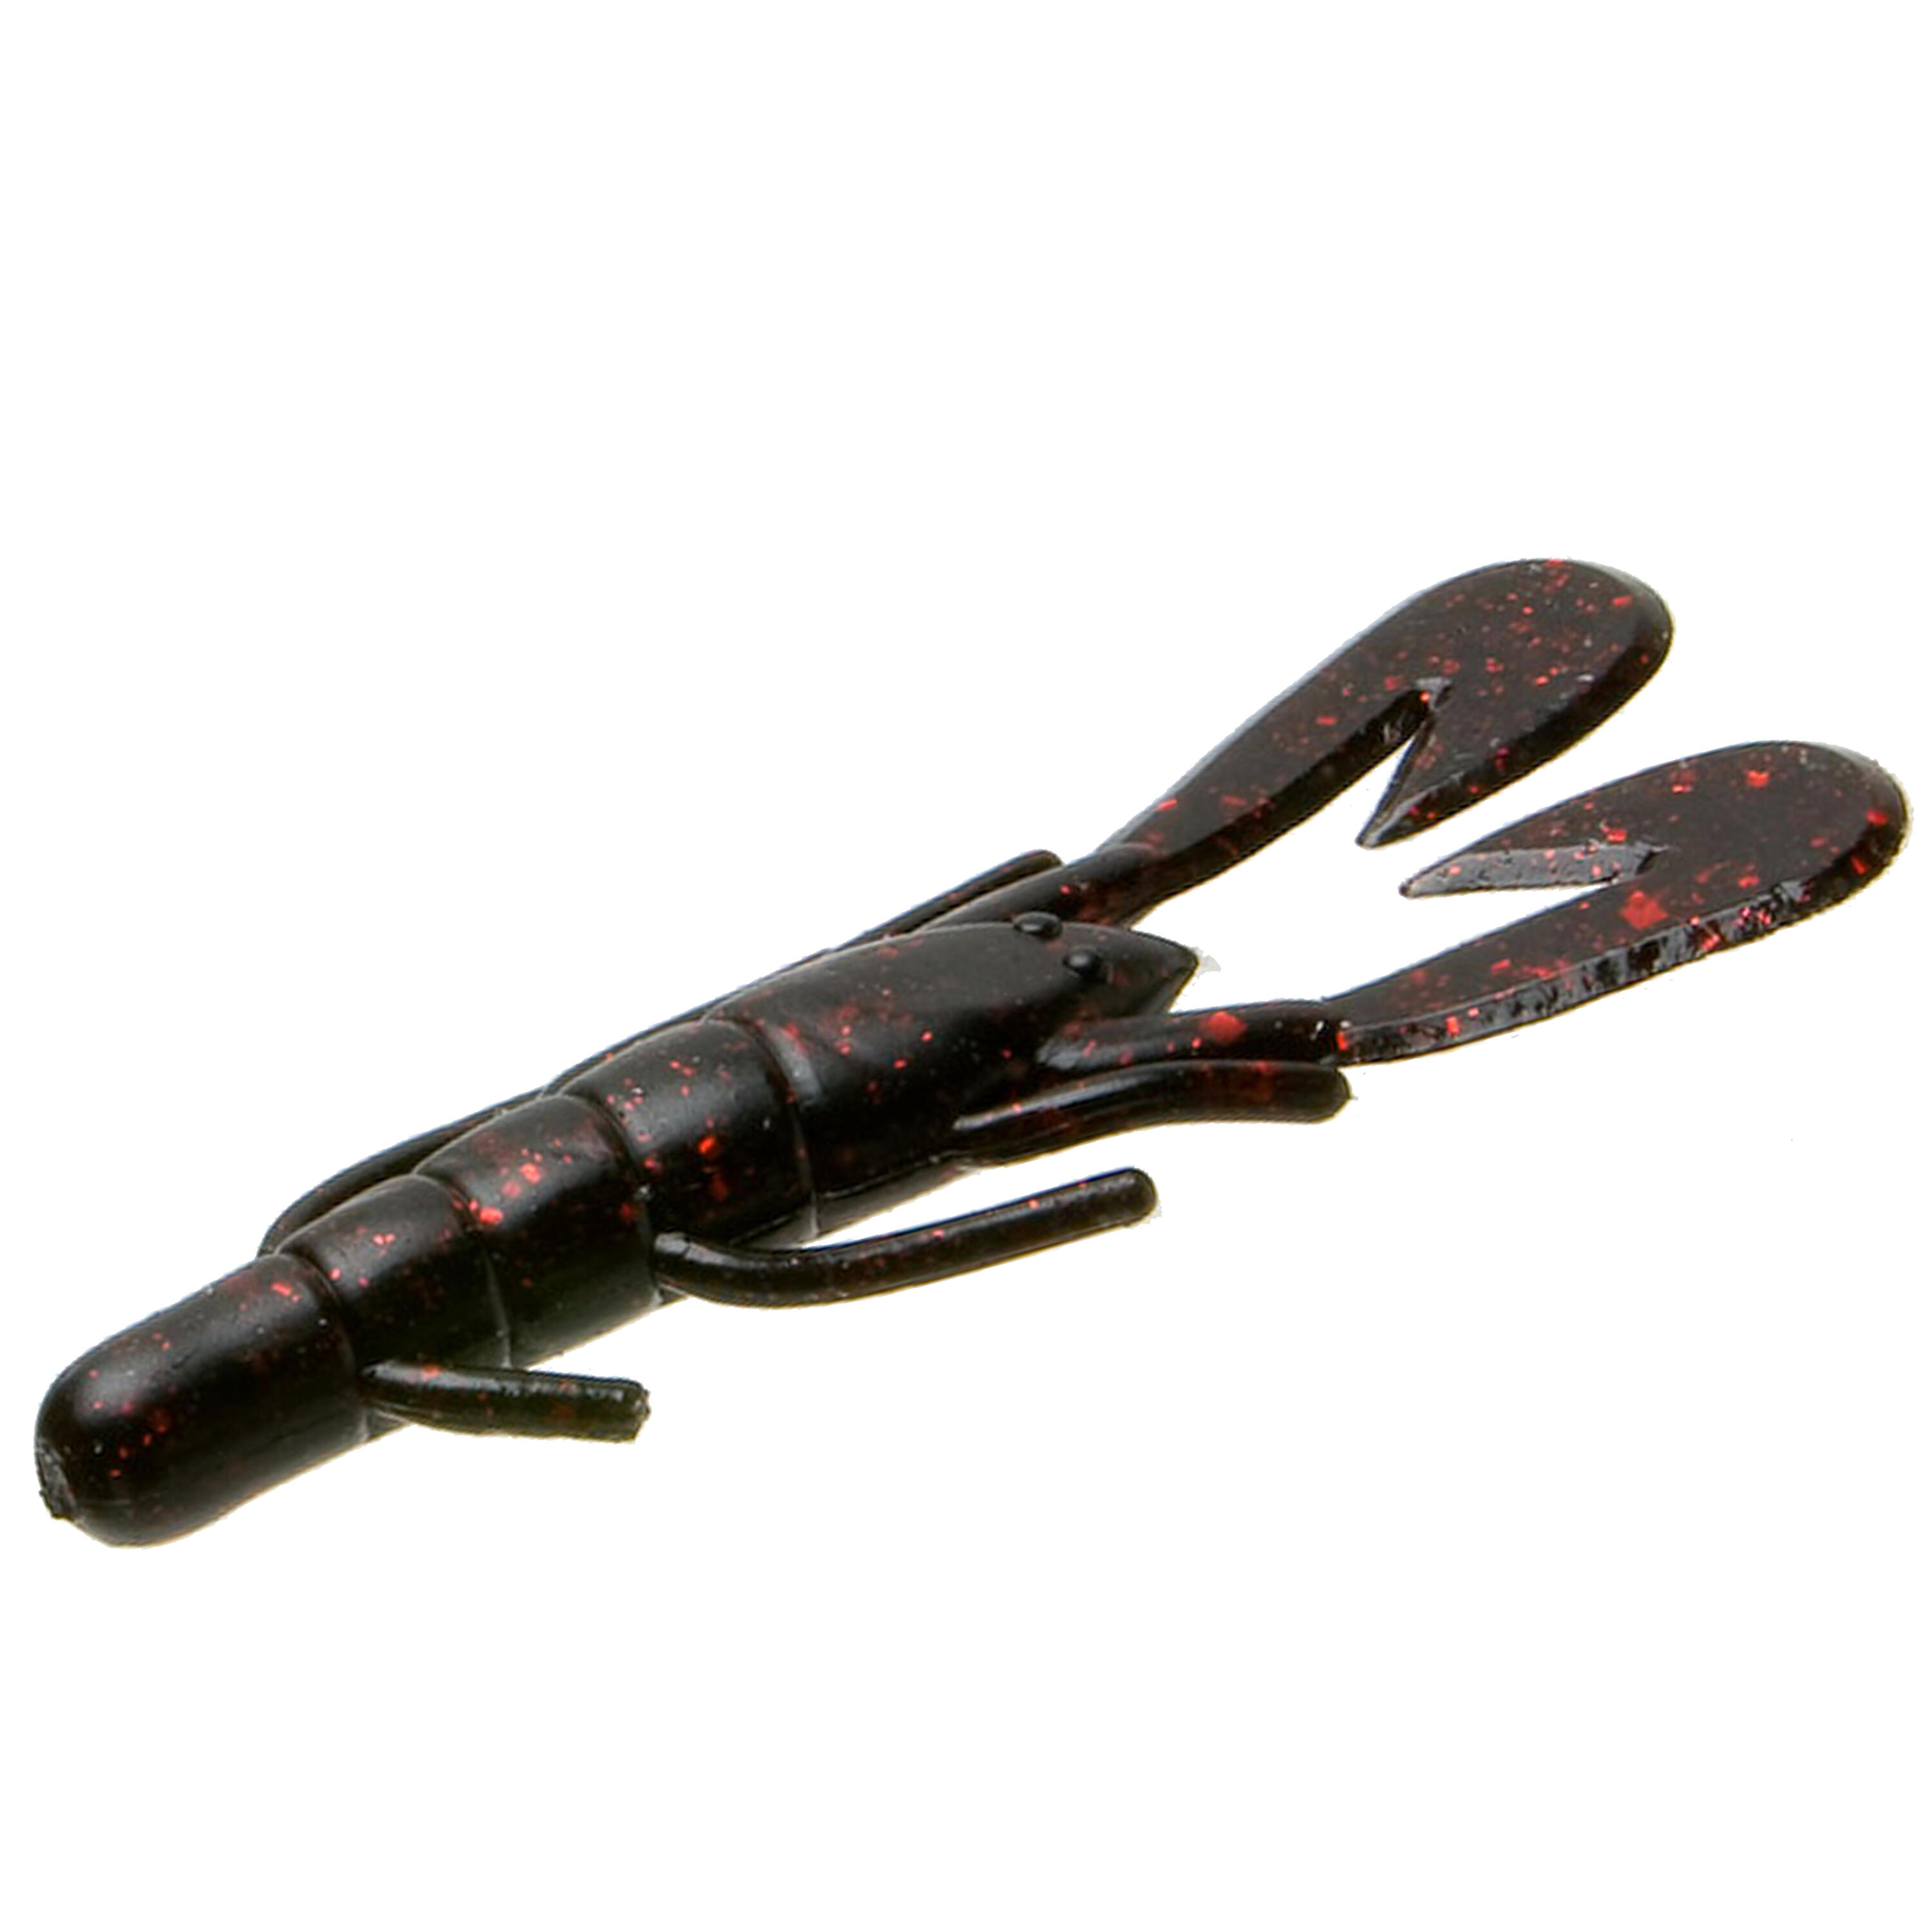 ZOOM SOFT LURE UV SPEED CRAW SOFT LURE BLACK AND RED